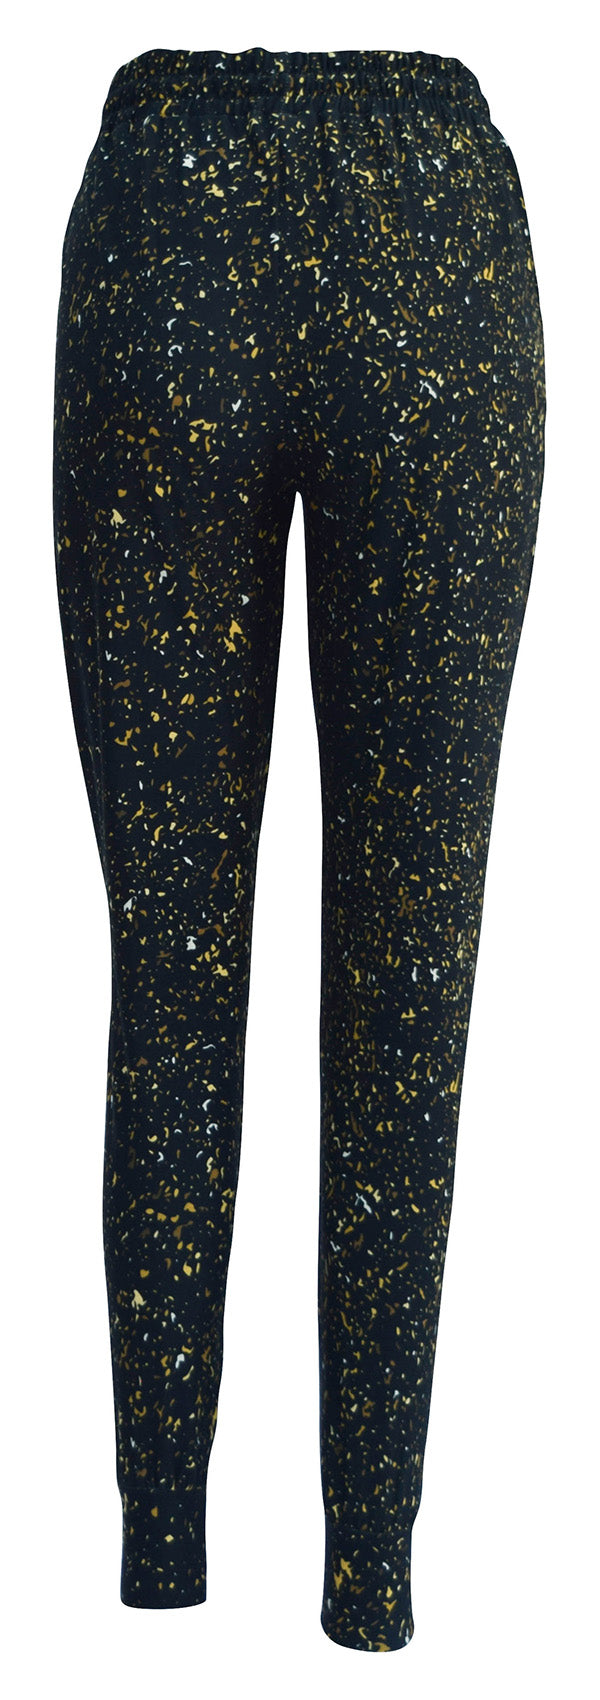 Gold Dust Lejoggers-Joggers